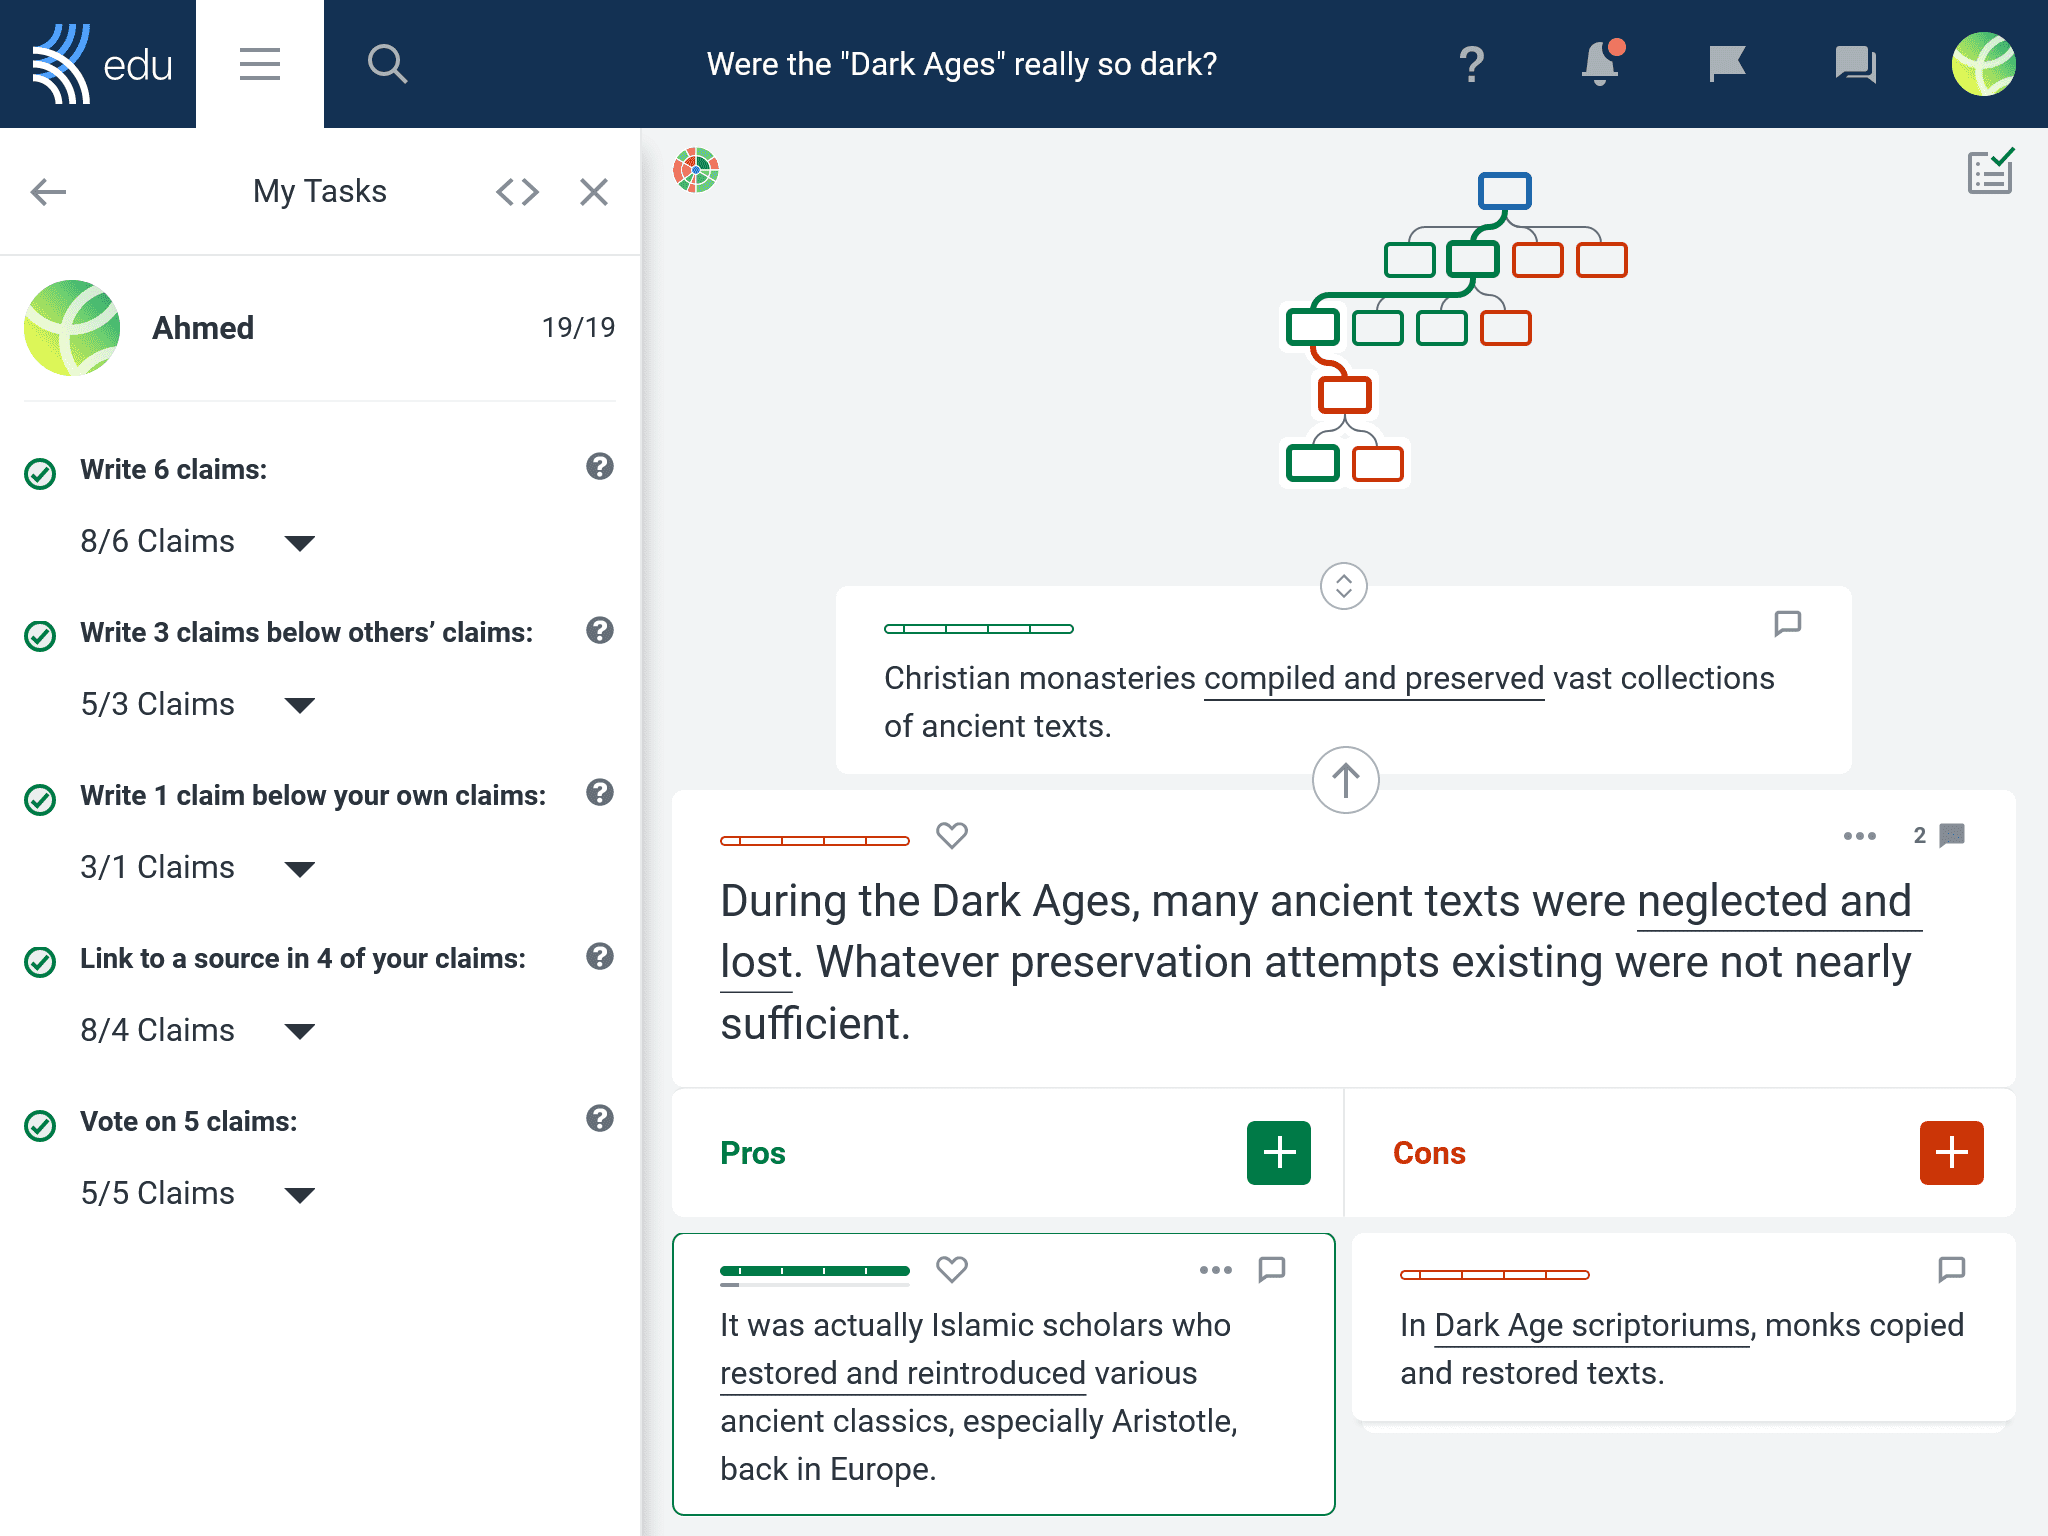 Giving students specific tasks to complete as shown on the left-handed side bar is a good way to AI proof an assignment. 